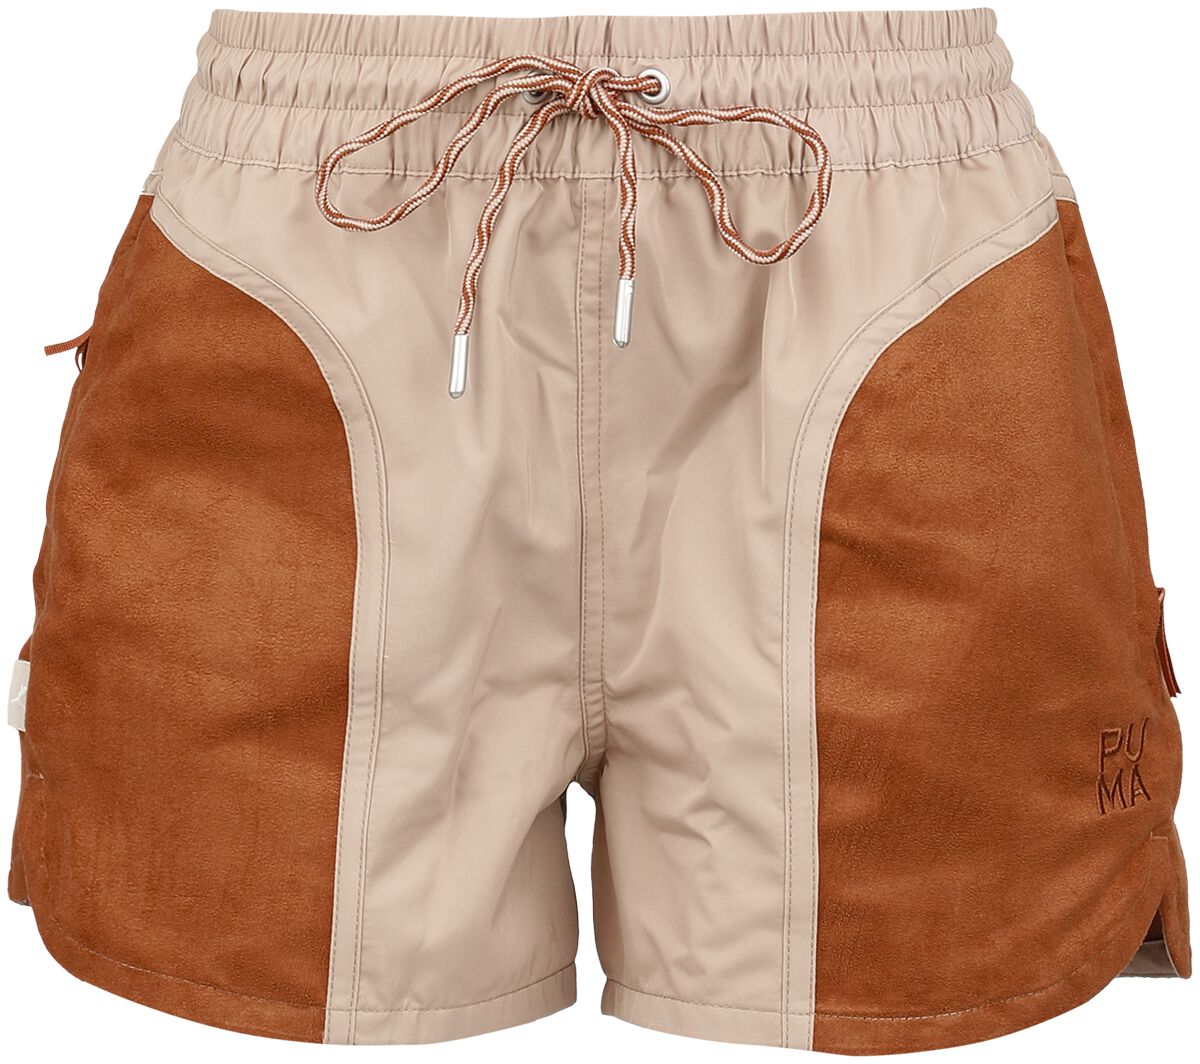 Puma INFUSE Woven Shorts Short beige in M